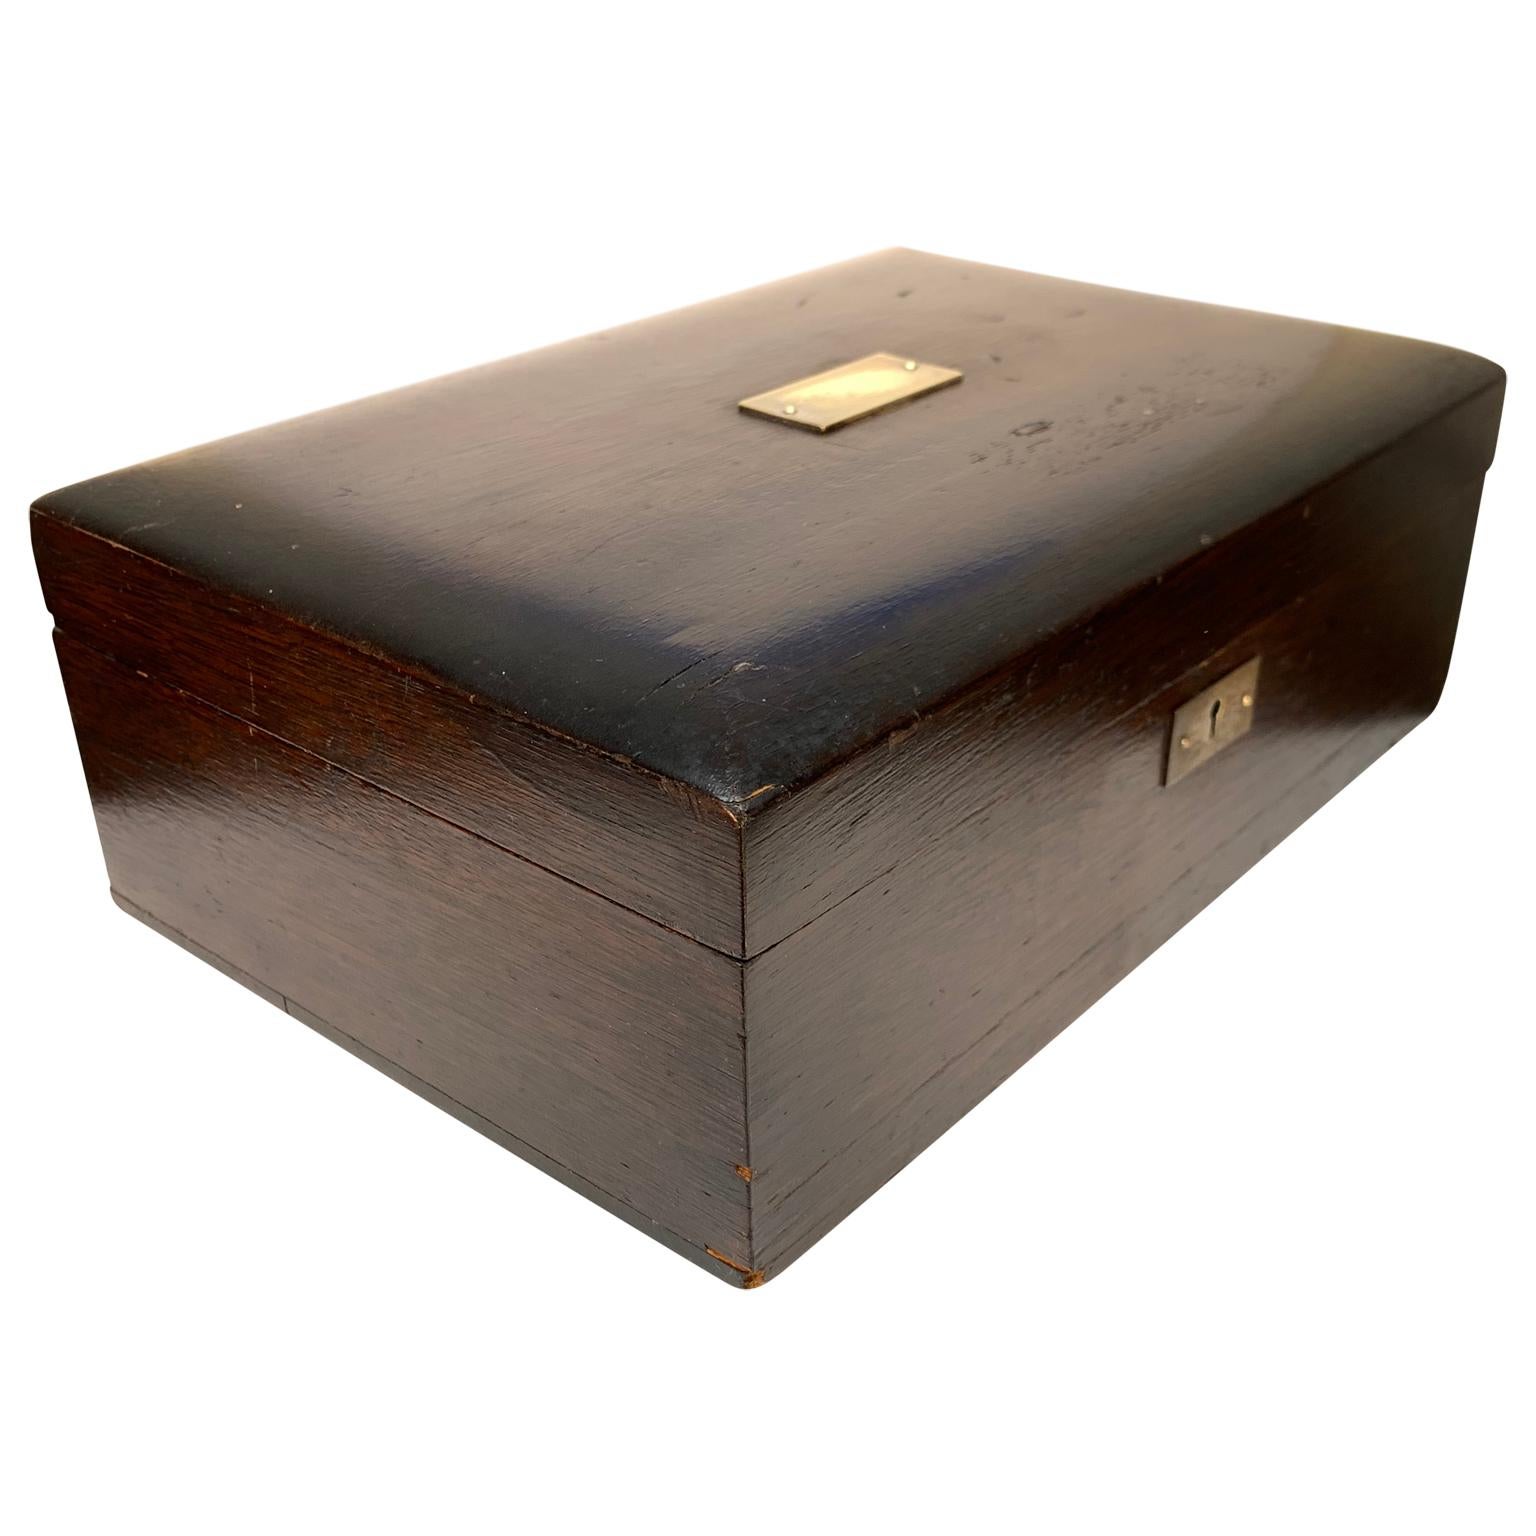 polished wooden box